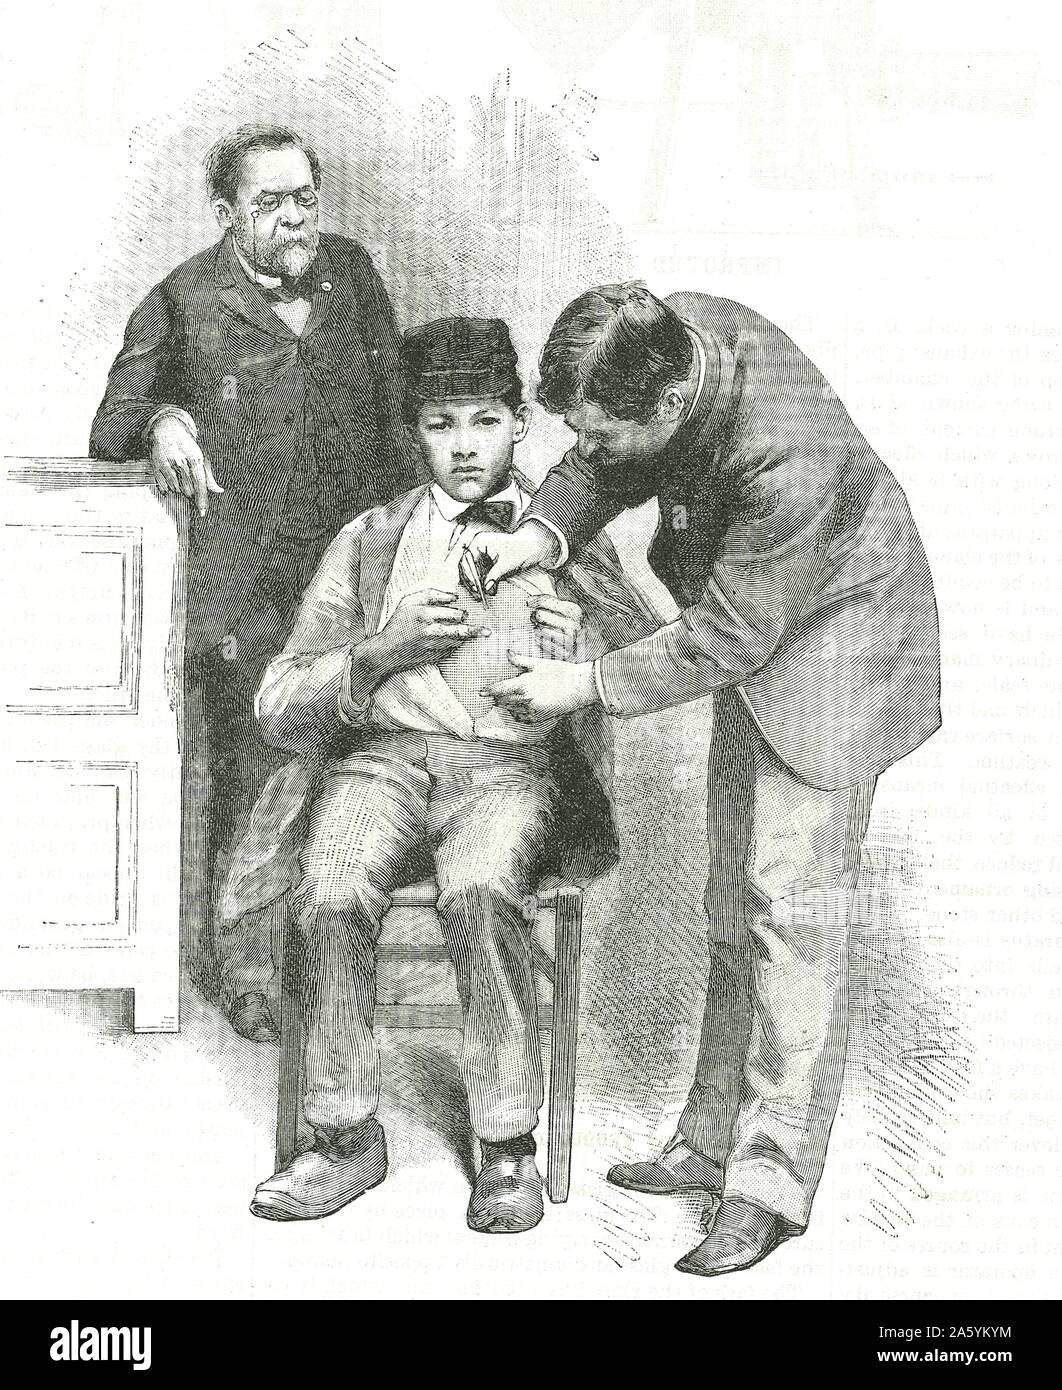 Louis Pasteur (1822-1895) French chemist, looking on as his assistant inoculates Joseph Meister, a shepherd boy who had been bitten by a rabid dog. Engraving from 'Scientific American', New York, 19 December 1885. Stock Photo